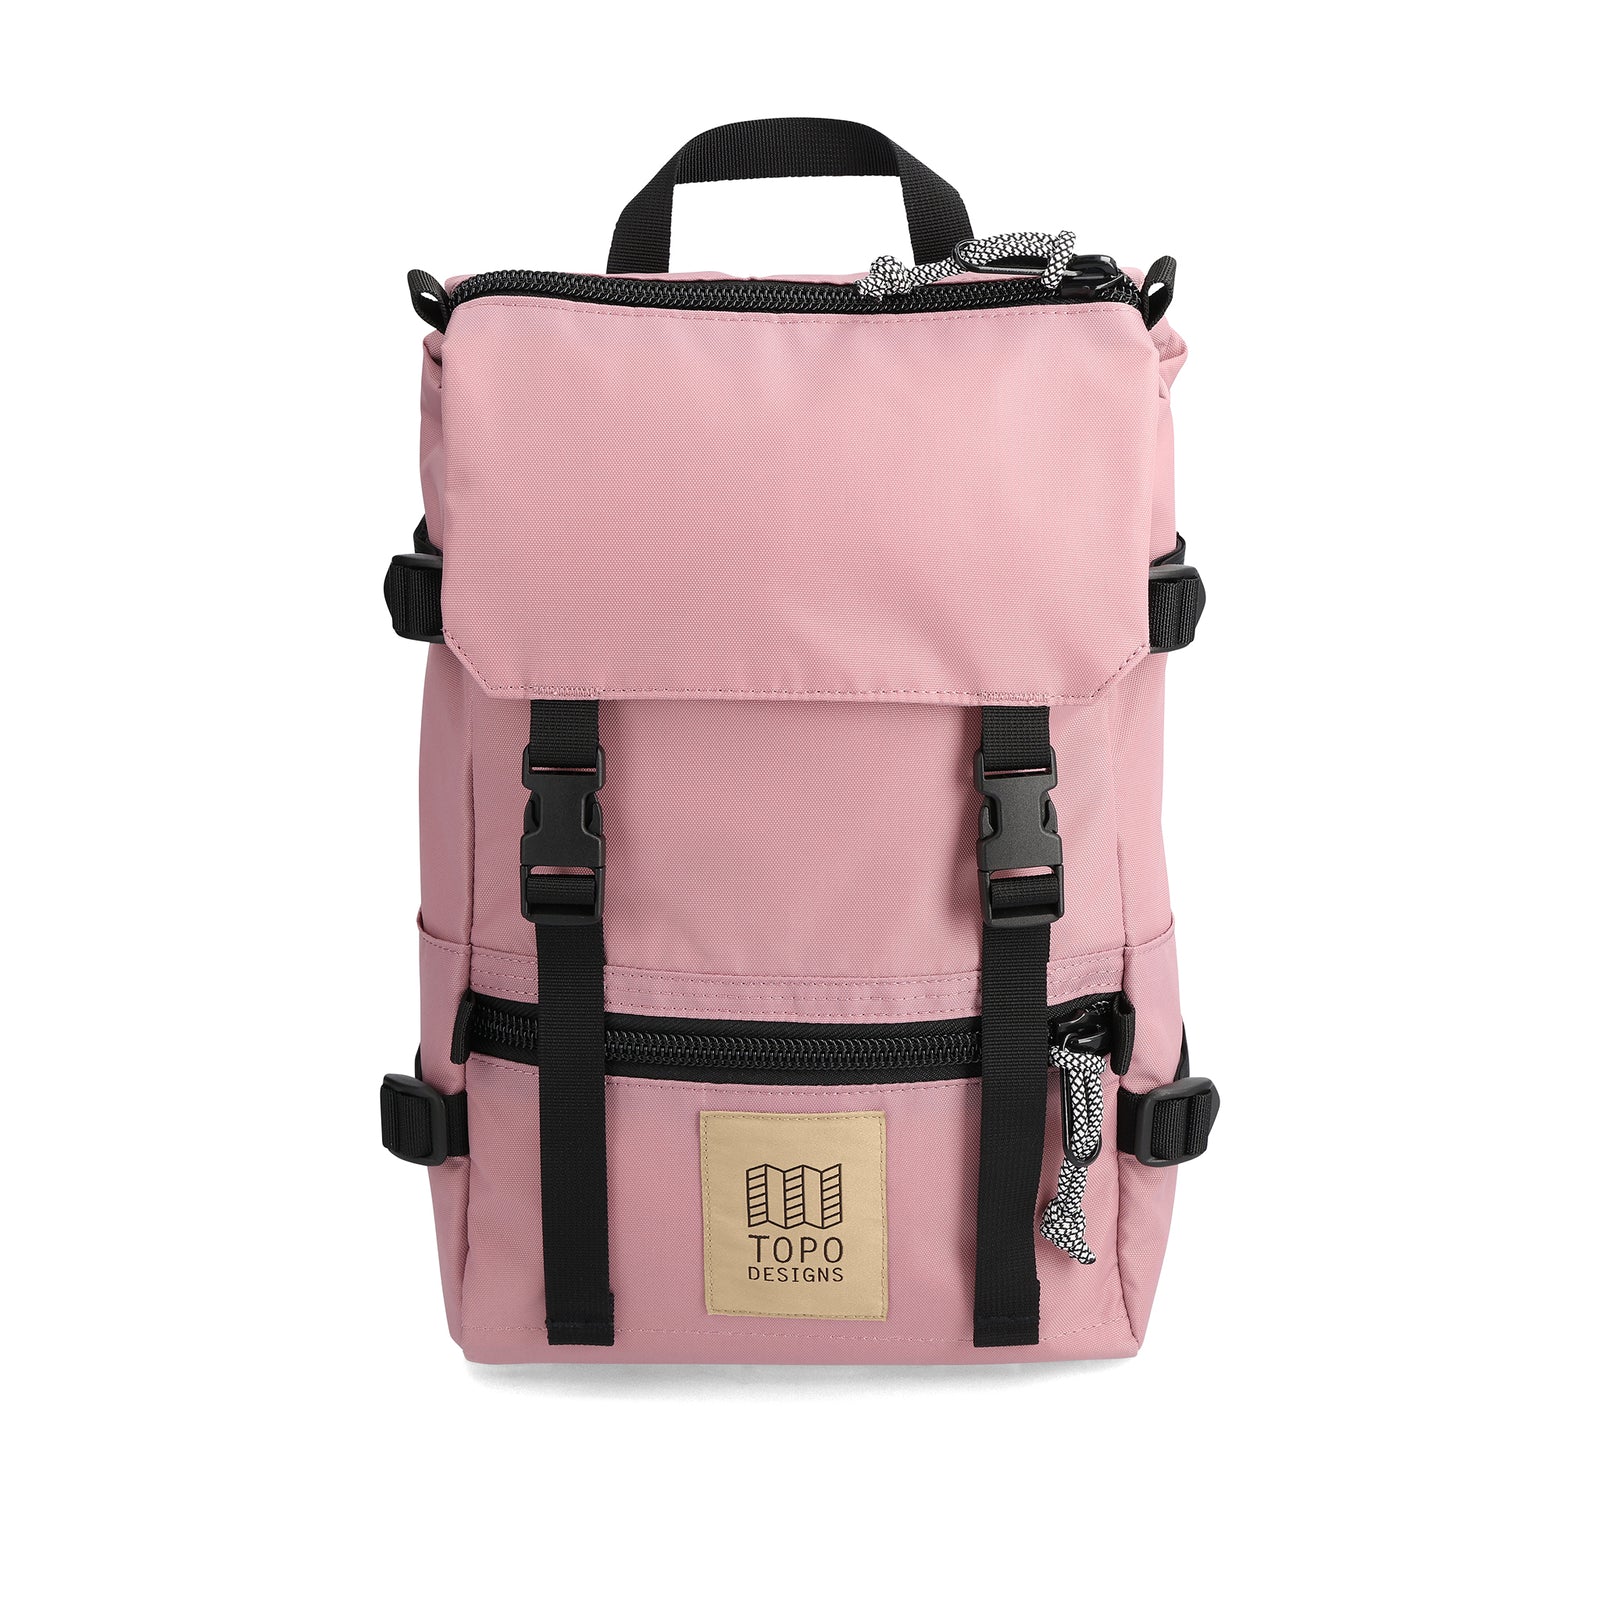 Front View of Topo Designs Rover Pack Mini in "Rose"